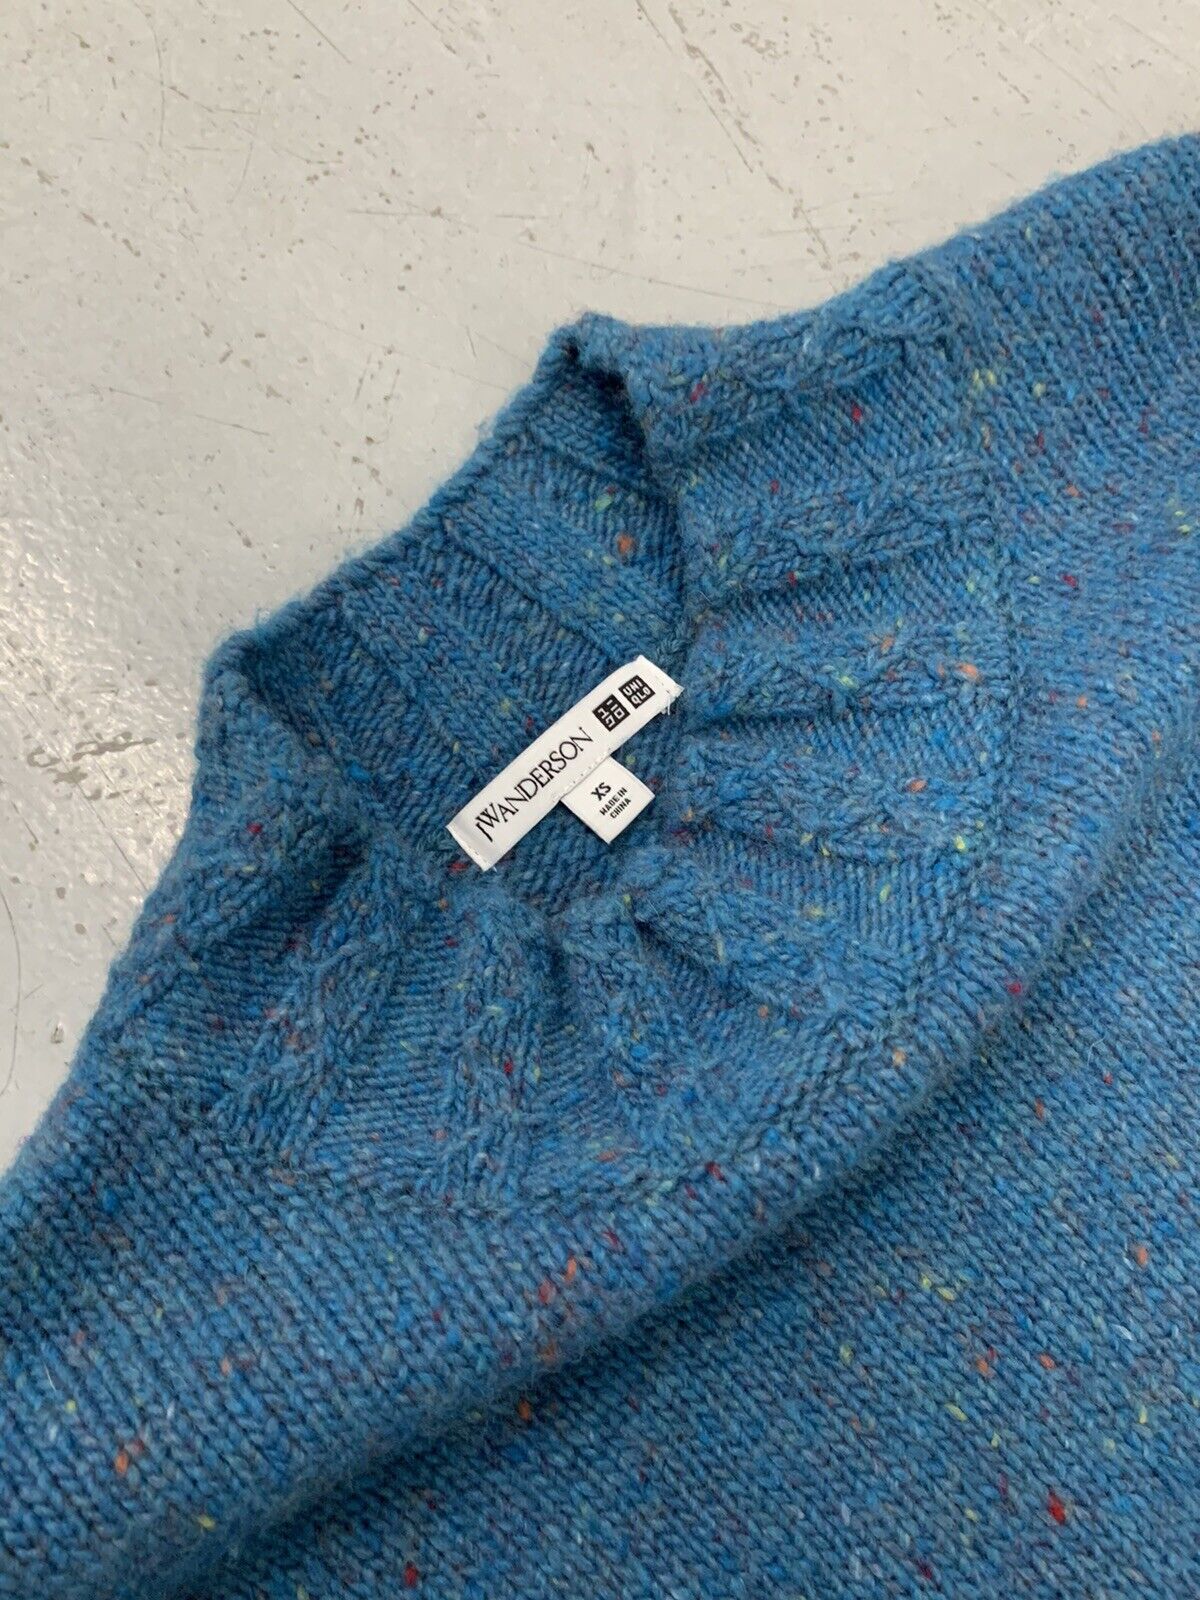 J W Anderson Uniqlo Wool Sweater XS Blue Pullover… - image 3